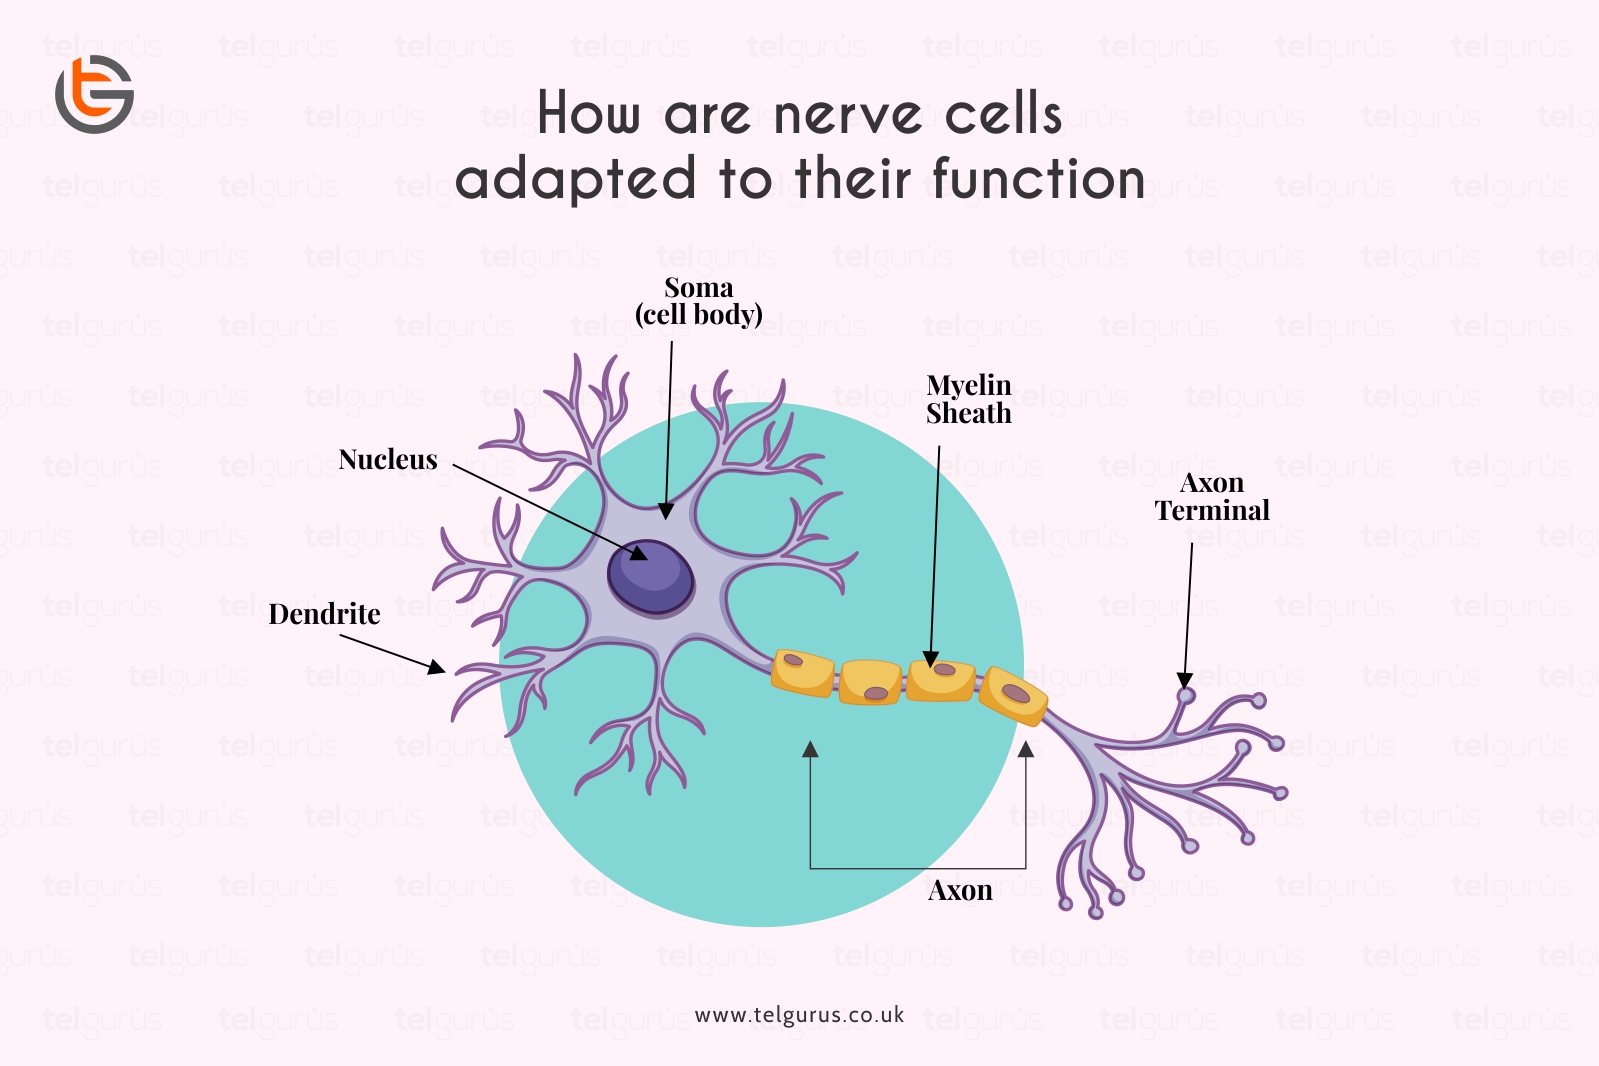 How are nerve cells adapted to their function?